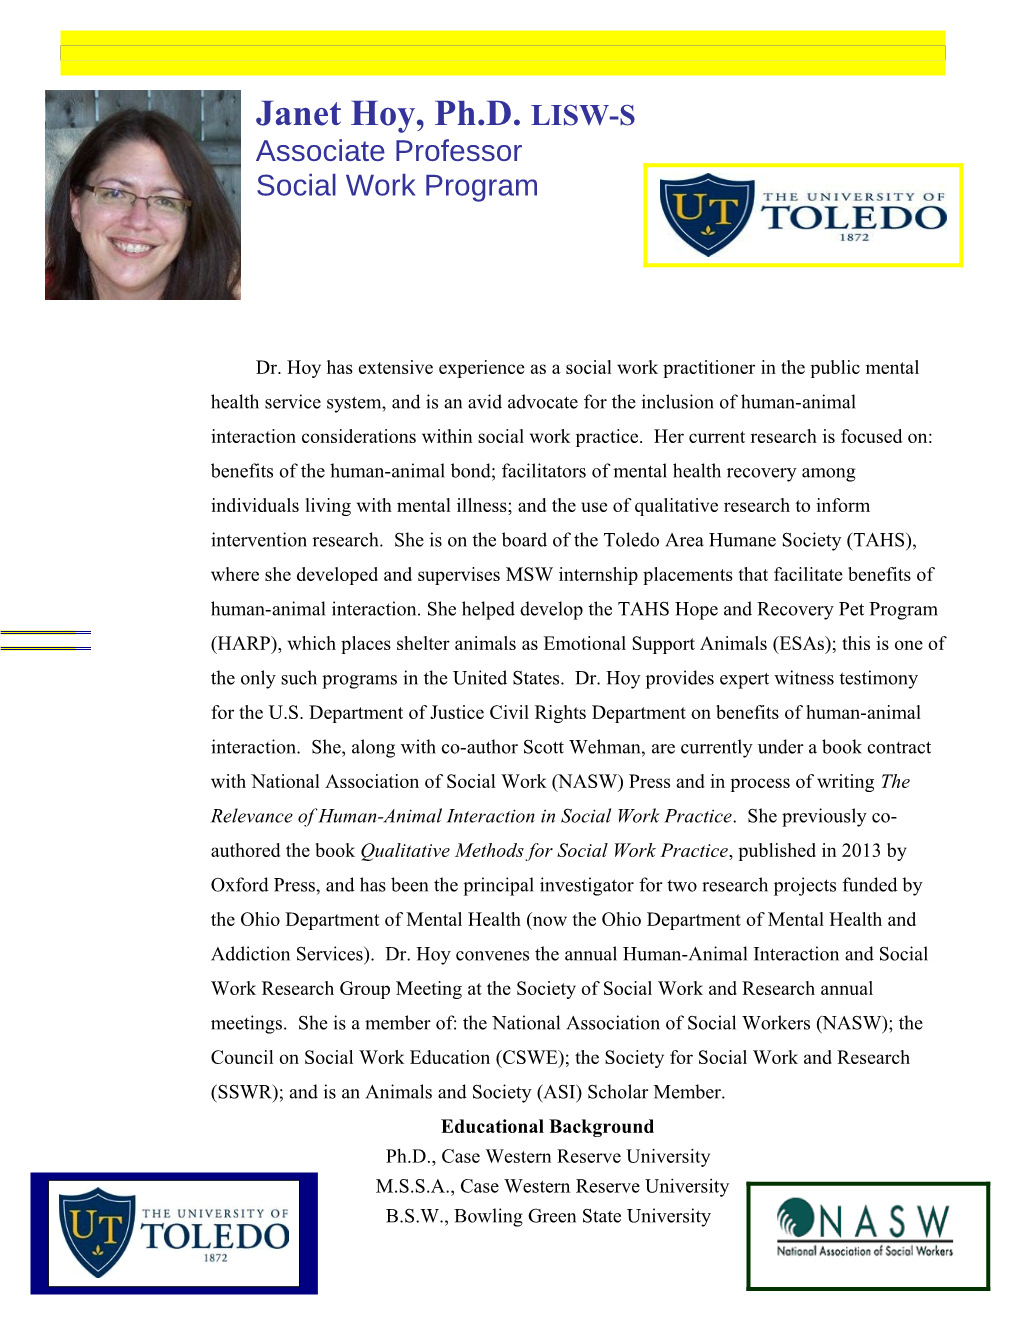 Sherry Tripepi, MSW, LISW, Is a Visiting Professor in the Social Work Department at The